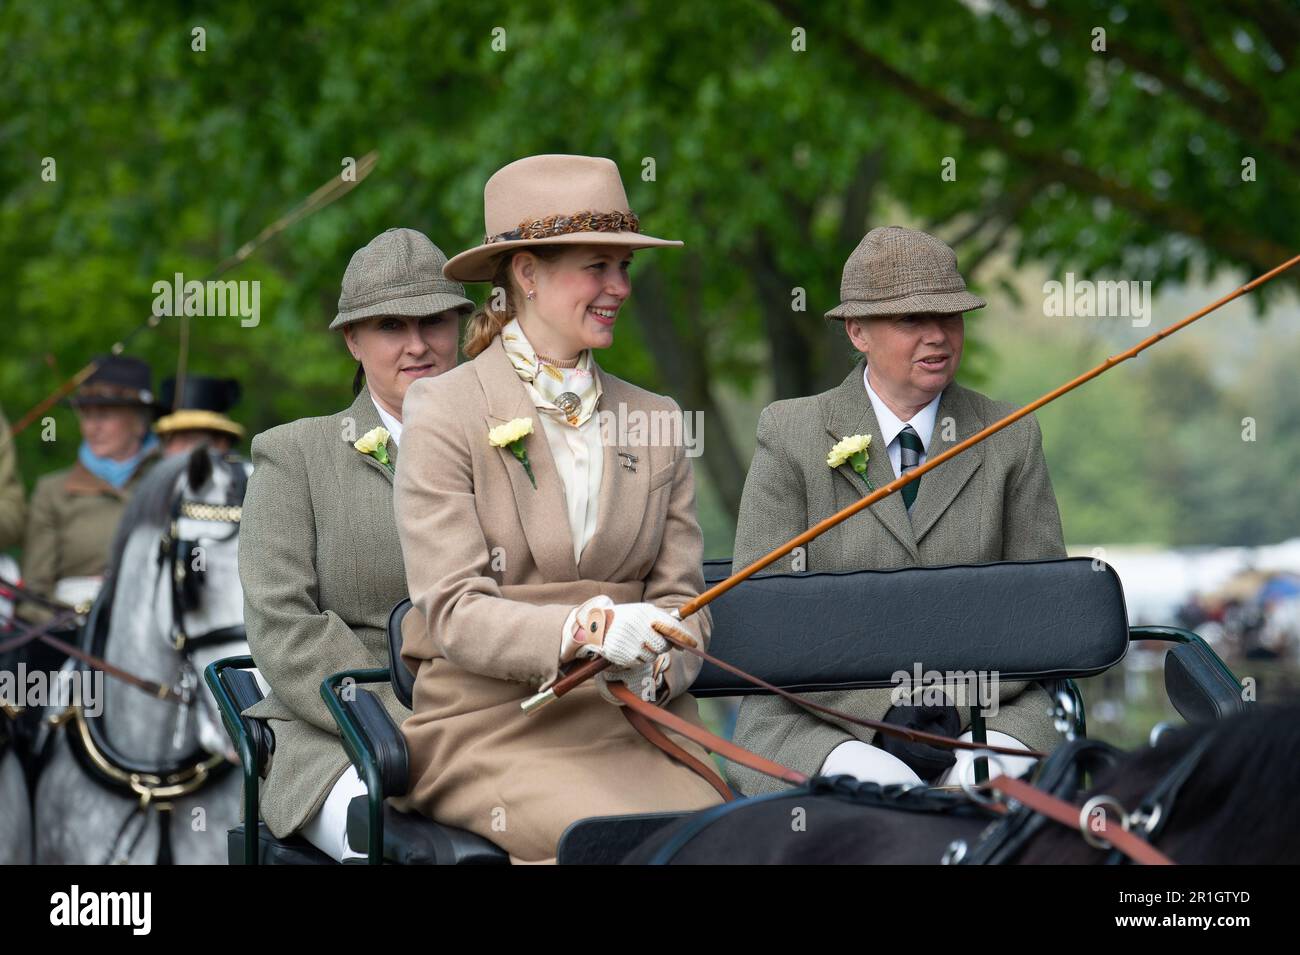 Windsor, Berkshire, UK. 14th May, 2023. Lady Louise Windsor at Royal Windsor Horse Show today carriage driving. The late Duke of Edinburgh was often seen carriage driving around Windsor Great Park and his grand daughter Lady Louise, is following in his footsteps at Royal Windsor Horse Show driving the Duke's carriage. Credit: Maureen McLean/Alamy Live News Stock Photo